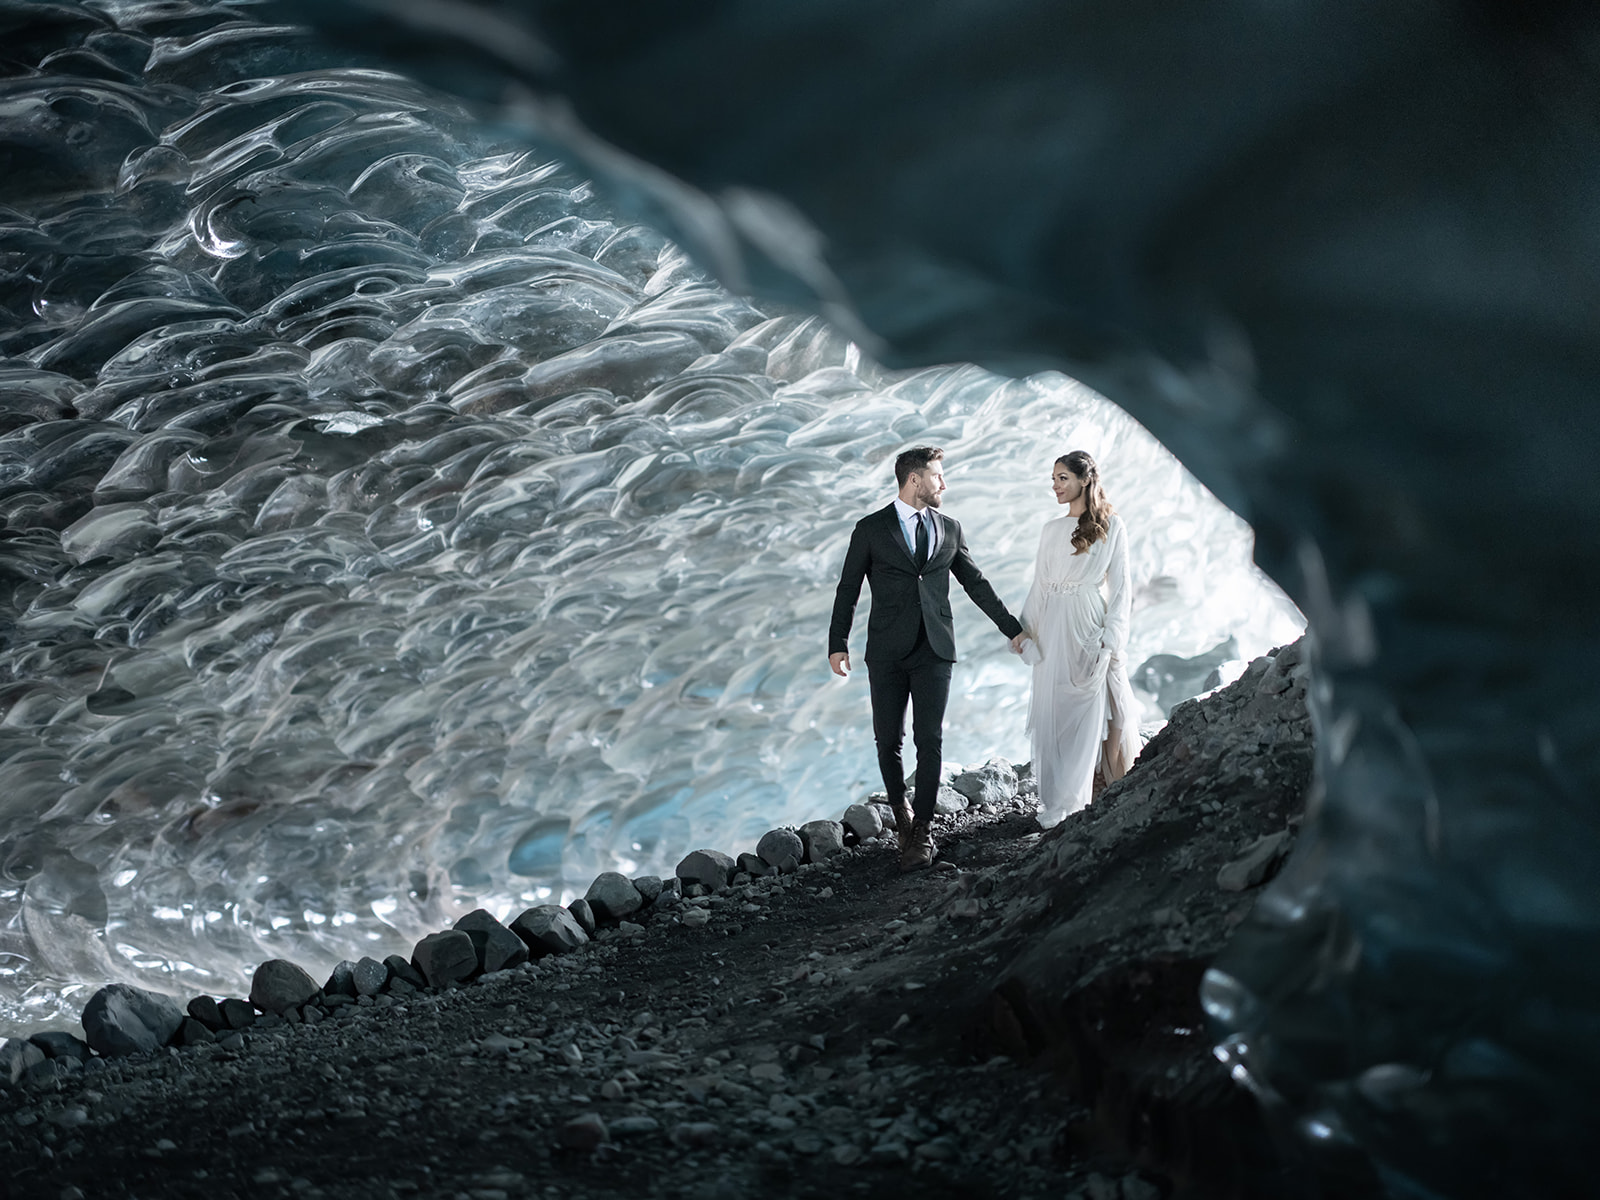 Bride and Groom exploring an Ice Cave during their Iceland Elopement.